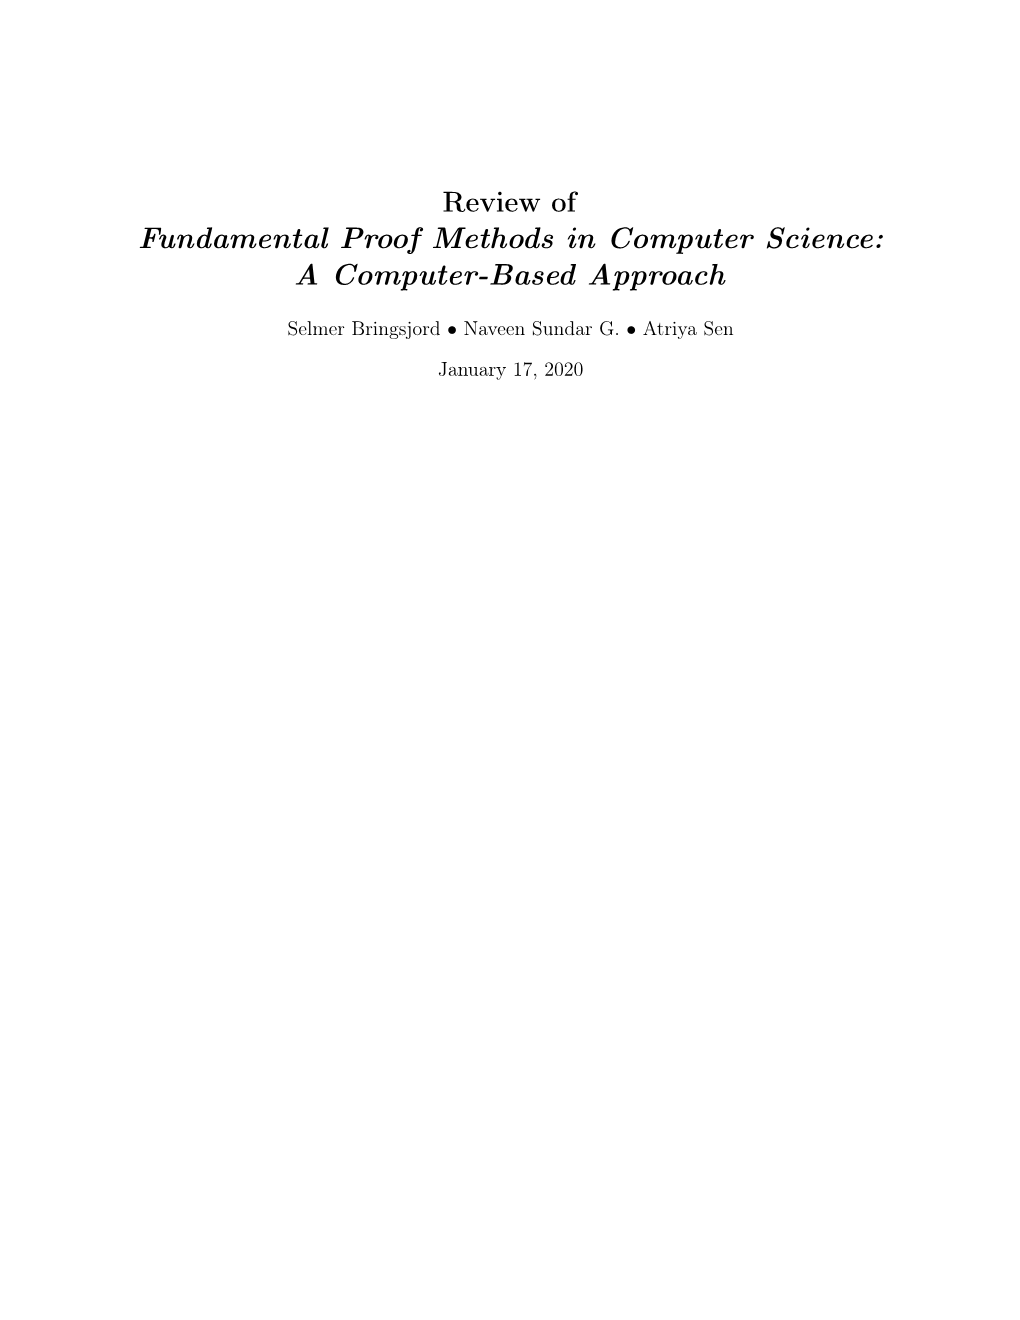 Review of Fundamental Proof Methods in Computer Science: a Computer-Based Approach